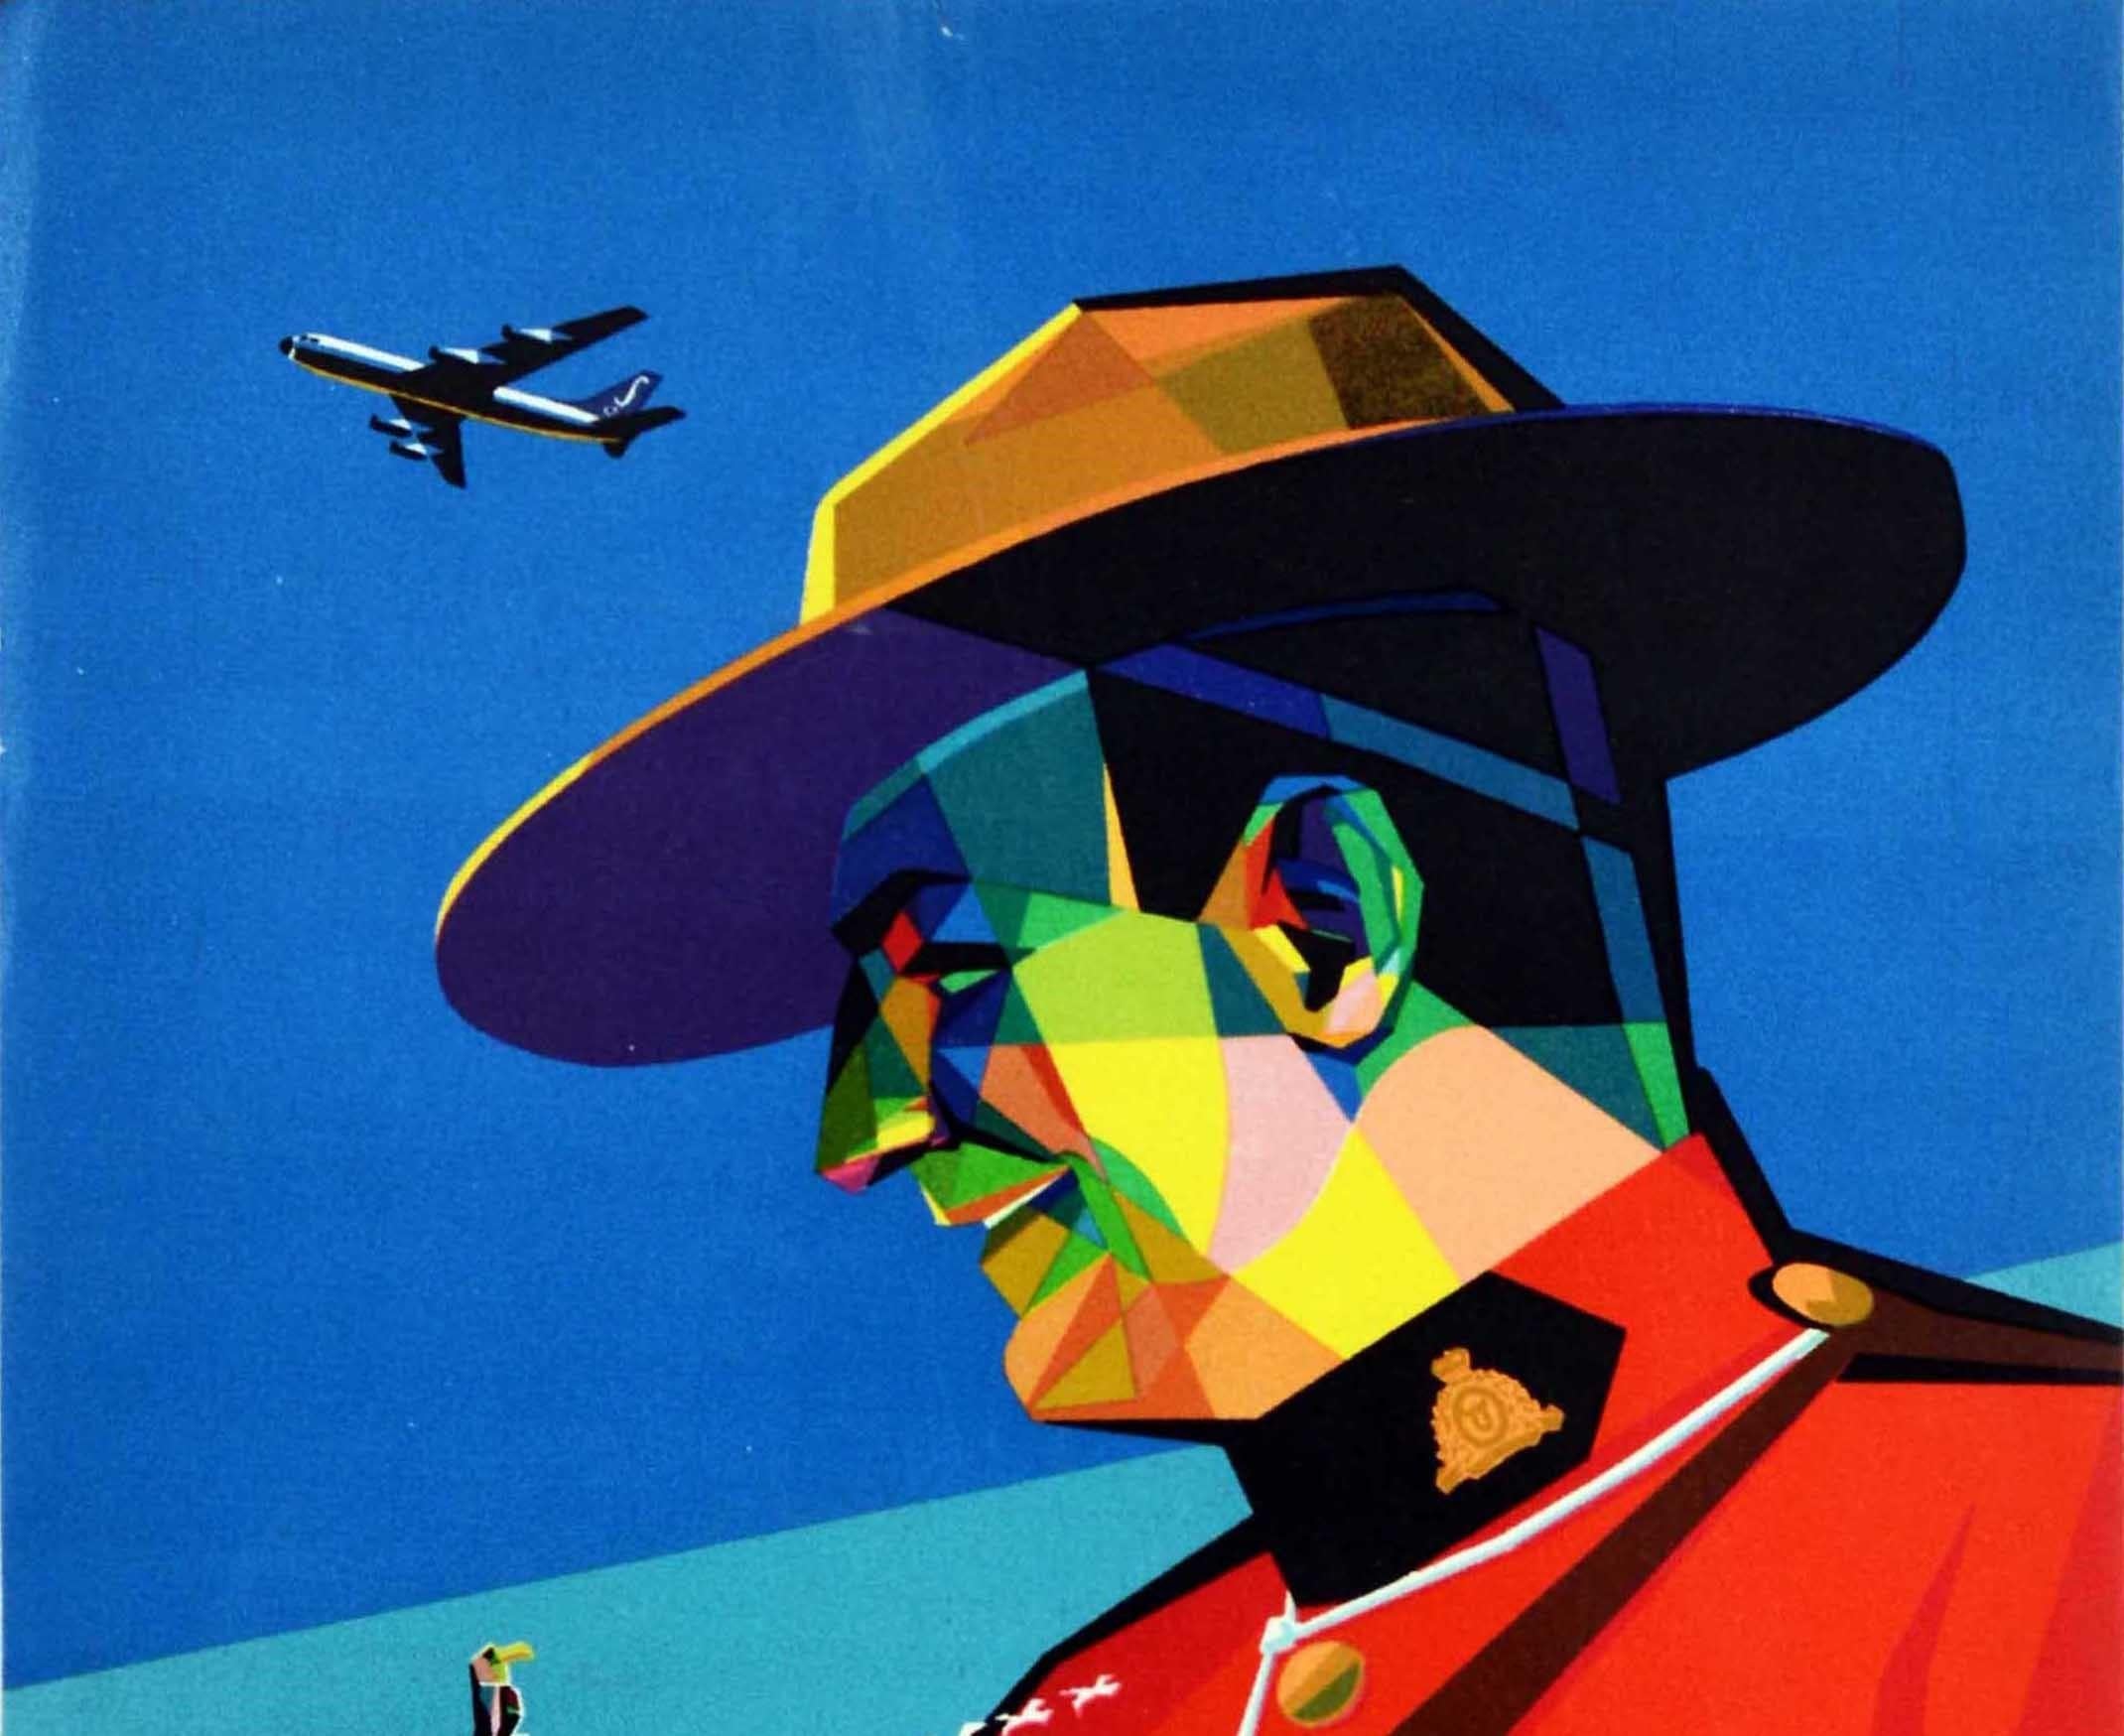 Original vintage travel advertising poster - verso il Canada con la Sabena / to Canada with Sabena (the national airline of Belgium from 1923-2001) - featuring a colourful mid-century design showing a smiling Canadian Mounted Police officer wearing